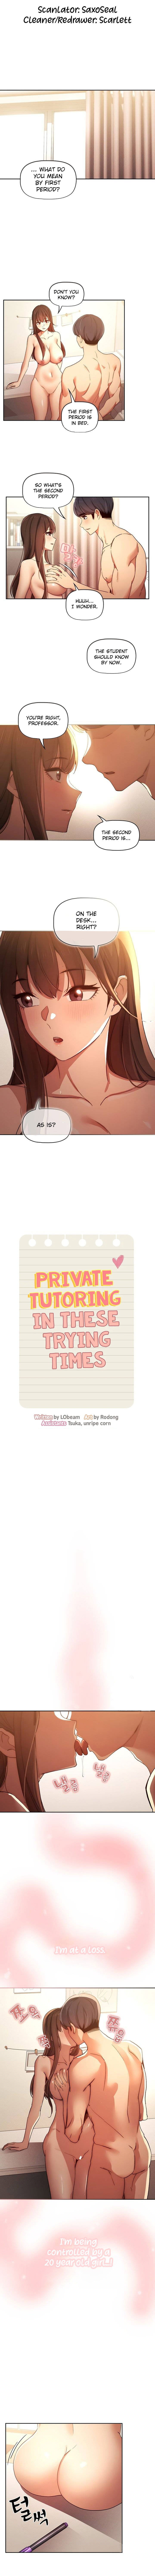 private-tutoring-in-these-trying-times-chap-32-0